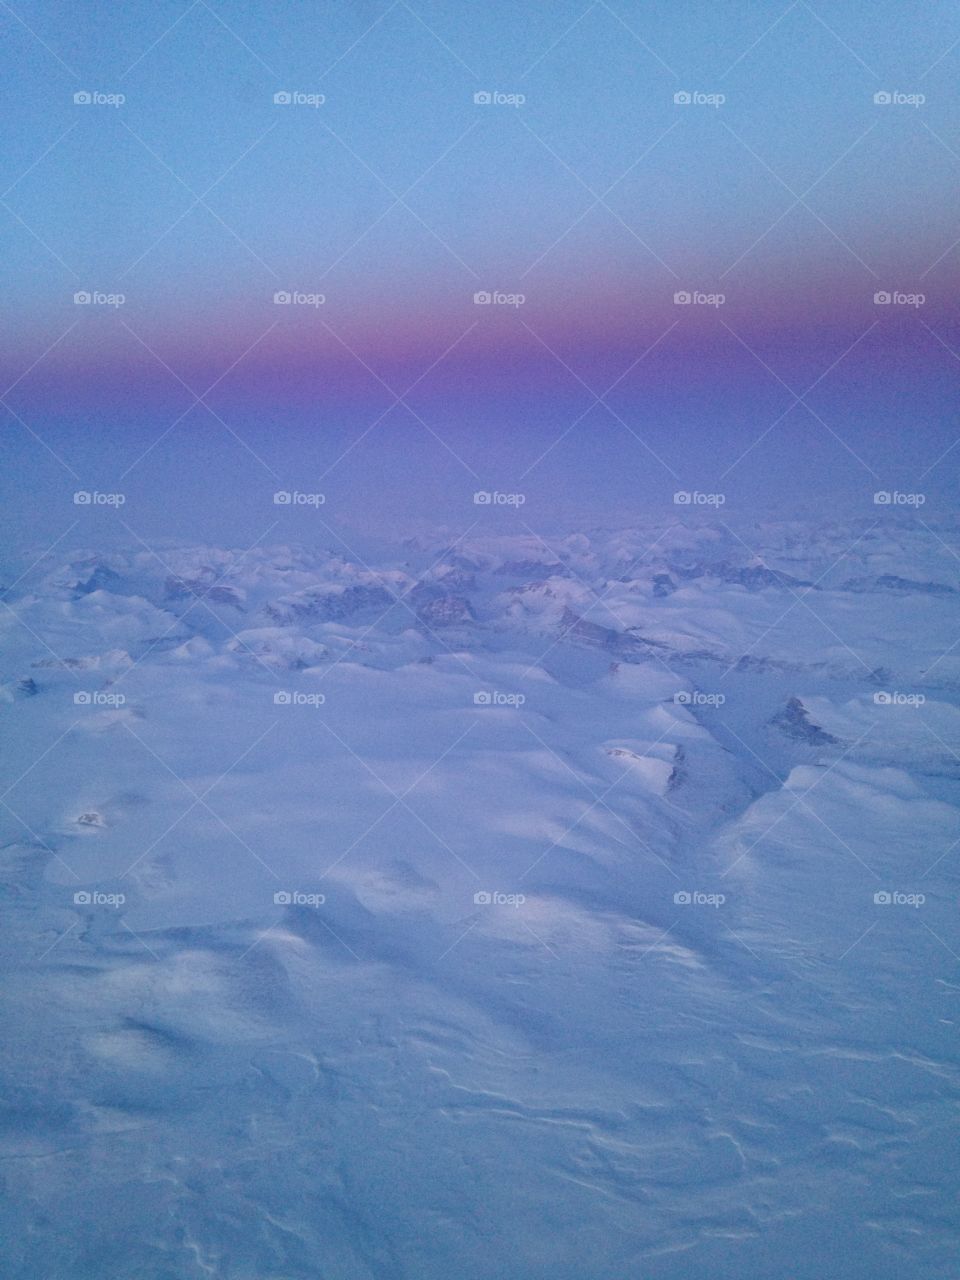 Glaciers from an airplane